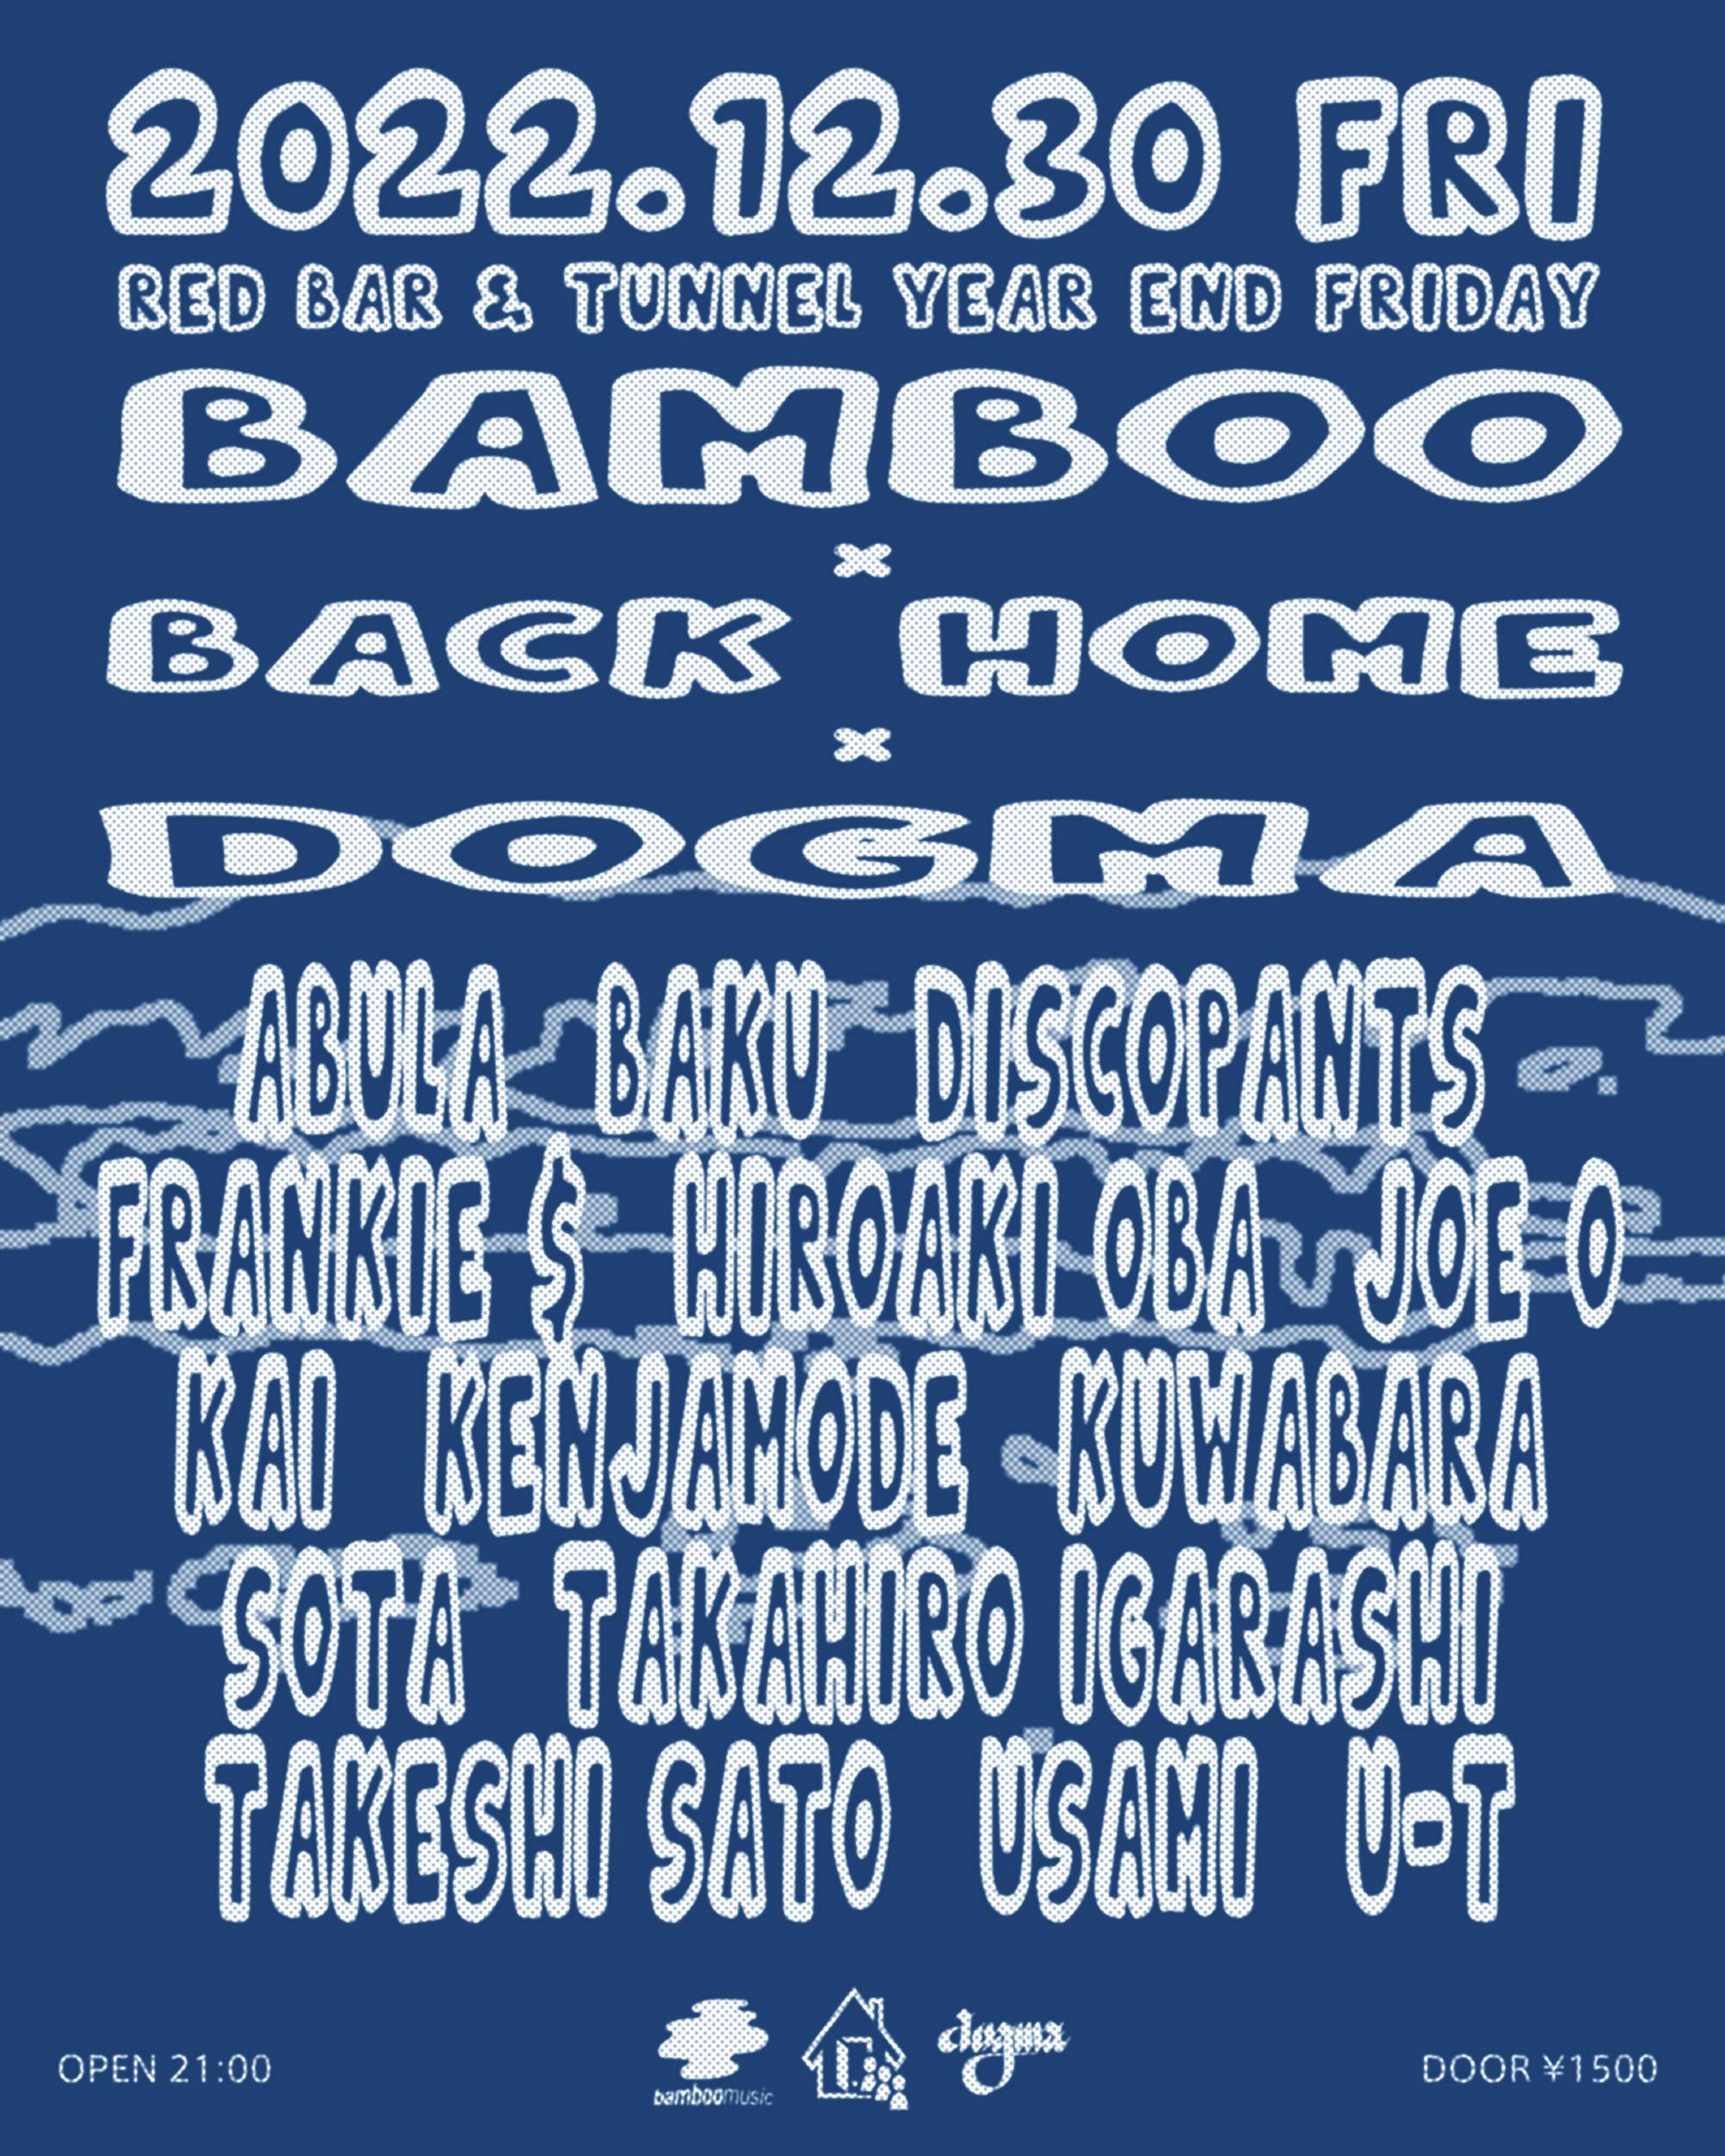 Red Bar & TUNNEL YEAR END FRIDAY -bamboo × Back Home × dogma- - フライヤー表